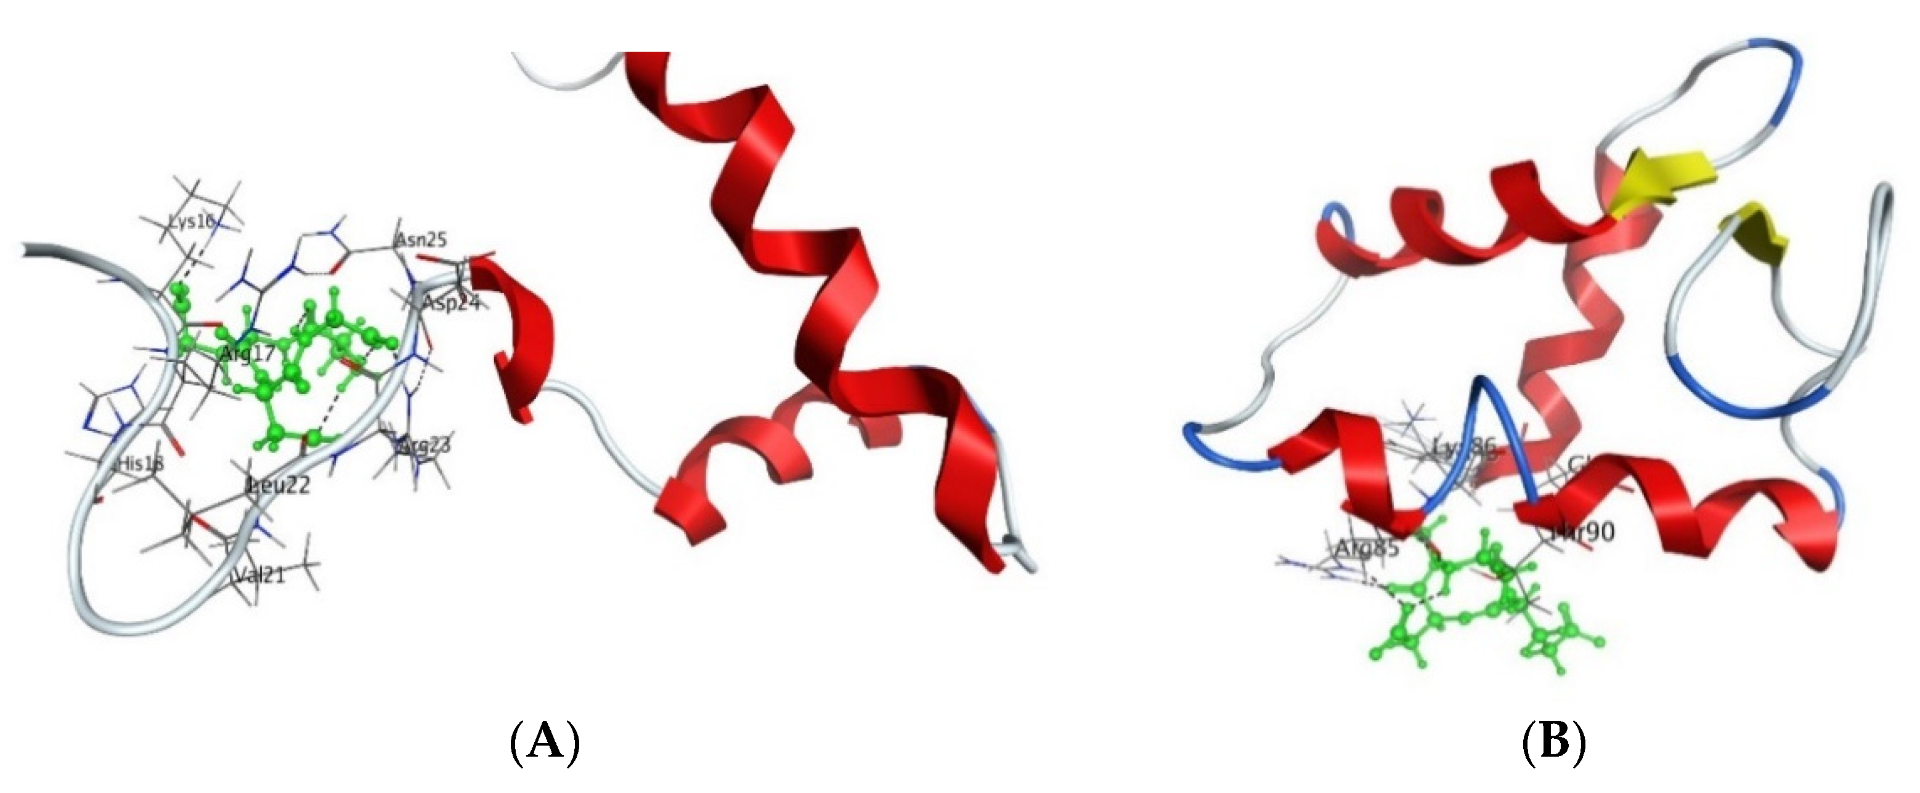 Figure 3. Interaction of AEDG peptide with H4 histone (A) and H1/6 histone (B) in accordance with the data obtained from the forcefield molecular modeling (Molecular Operating Environment, forcefield Amber12EHT). Histone molecules (Protein Data Bank) are depicted as α-helical domains and loops. Oxygen atoms are shown in red, nitrogen atoms in blue, carbon atoms in black, and hydrogen atoms in light gray. The peptide is highlighted in green. The dotted line shows hydrogen bonds. 